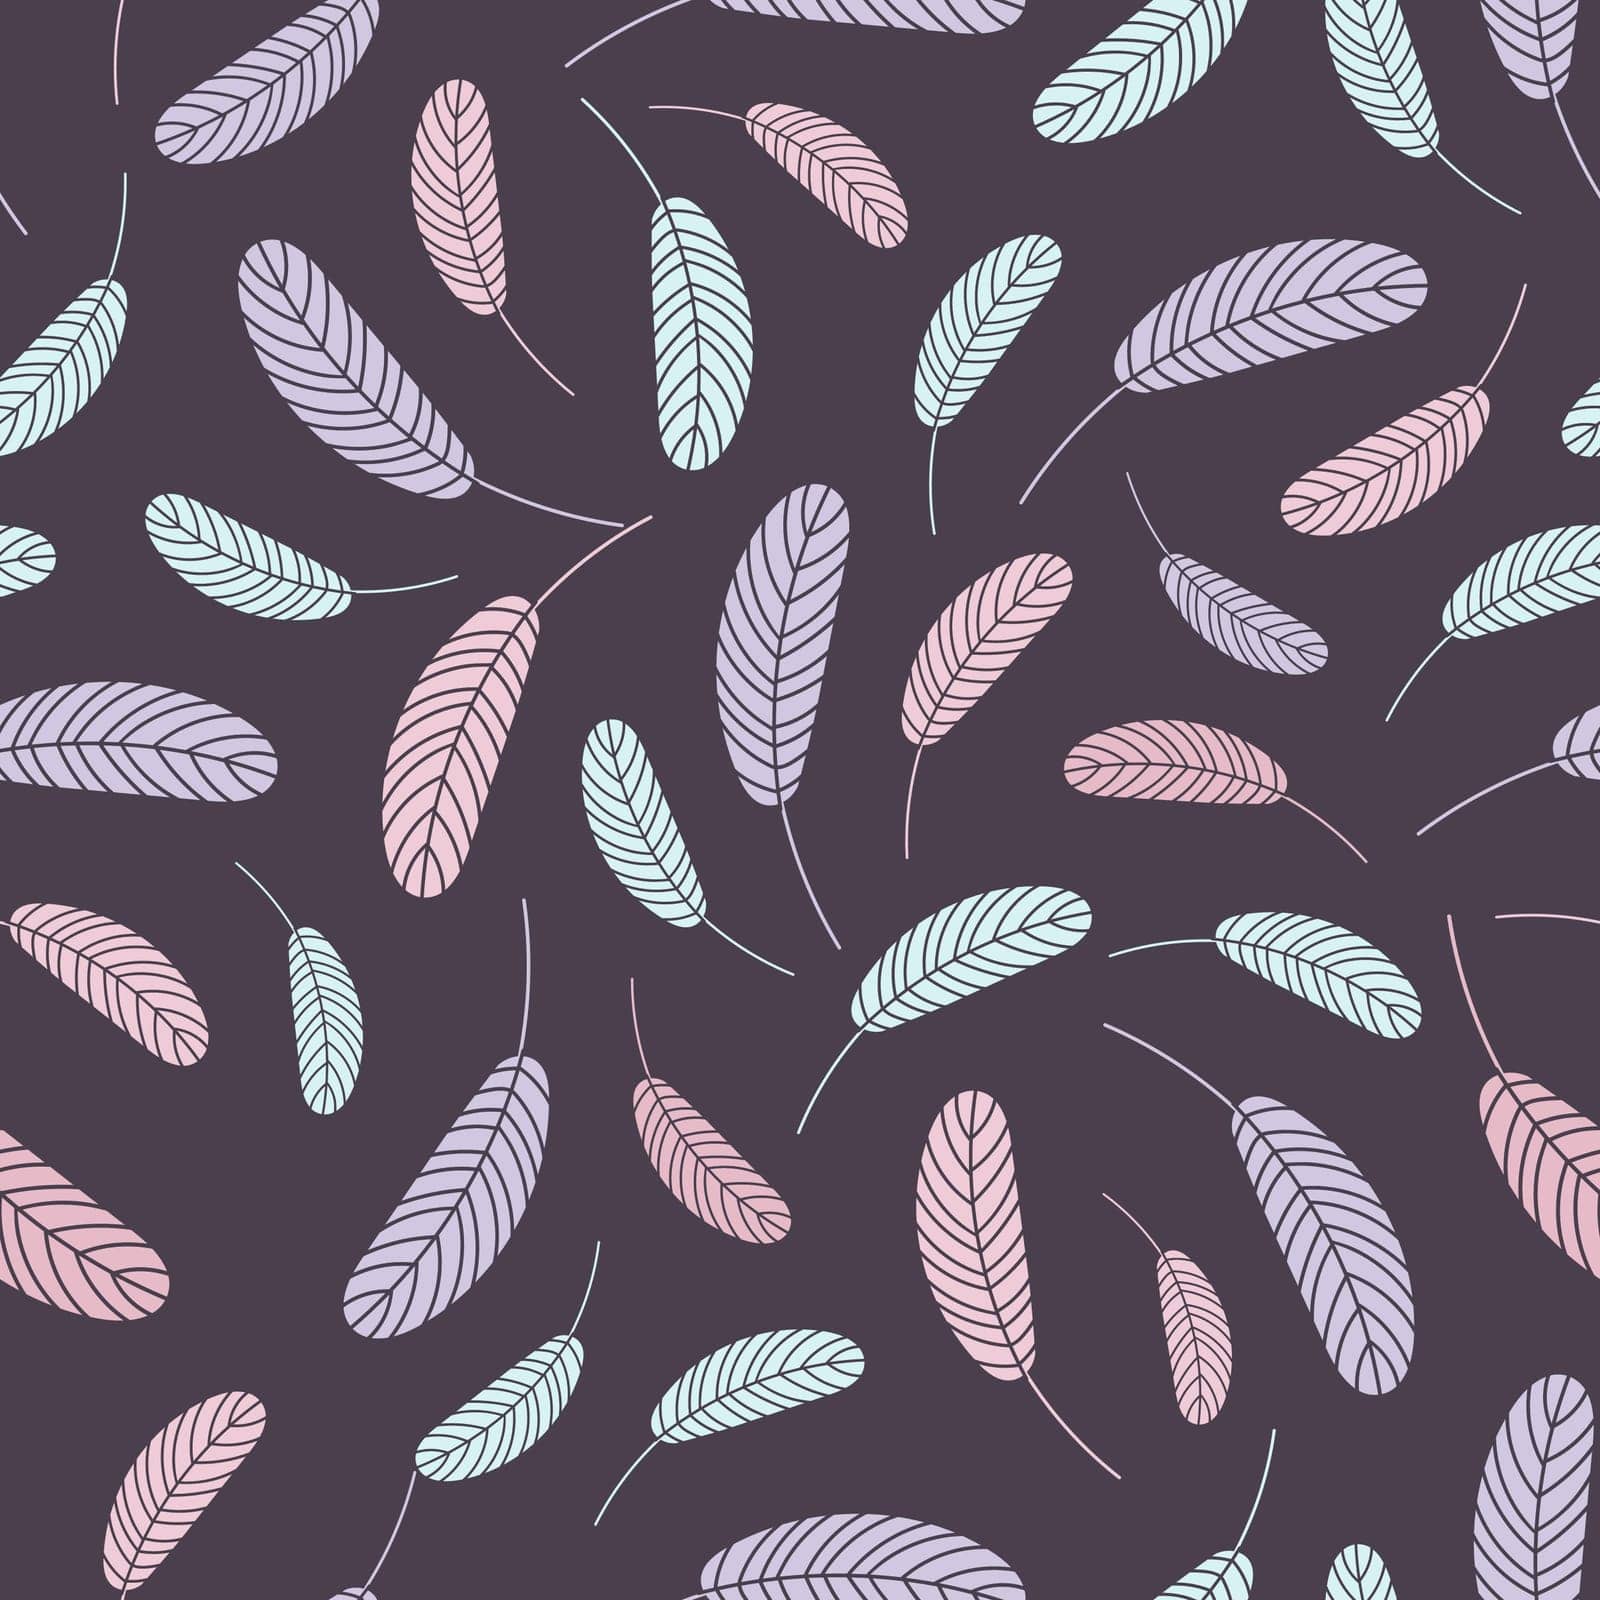 Bird feathers seamless pattern. Easter pattern with chicken feathers. Vector flat illustration. Design for textiles, packaging, wrappers, greeting cards, paper, printing.